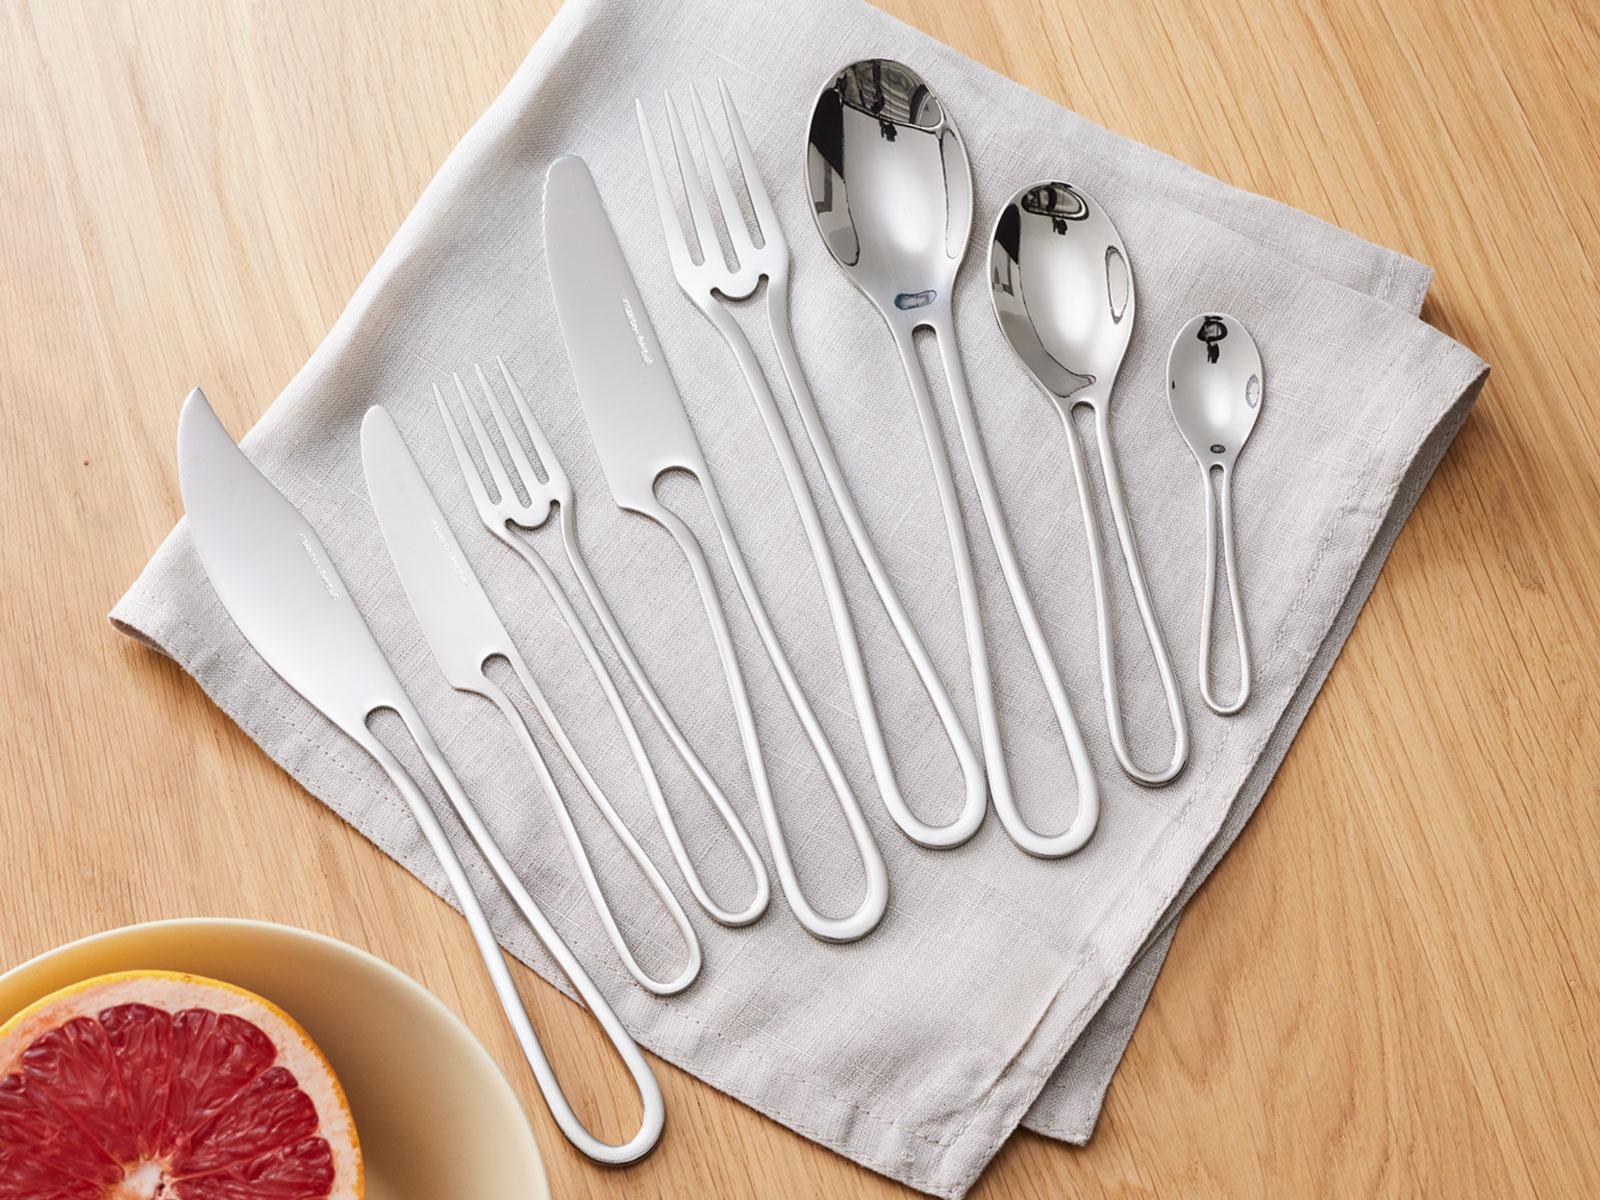 The stunning Outline Cutlery designed and produced by the artist himself. This brand new set of 48 pieces is perfect for those seeking sleek and modern flatware for their dining table.

The set includes six small forks, knives, and spoons, as well